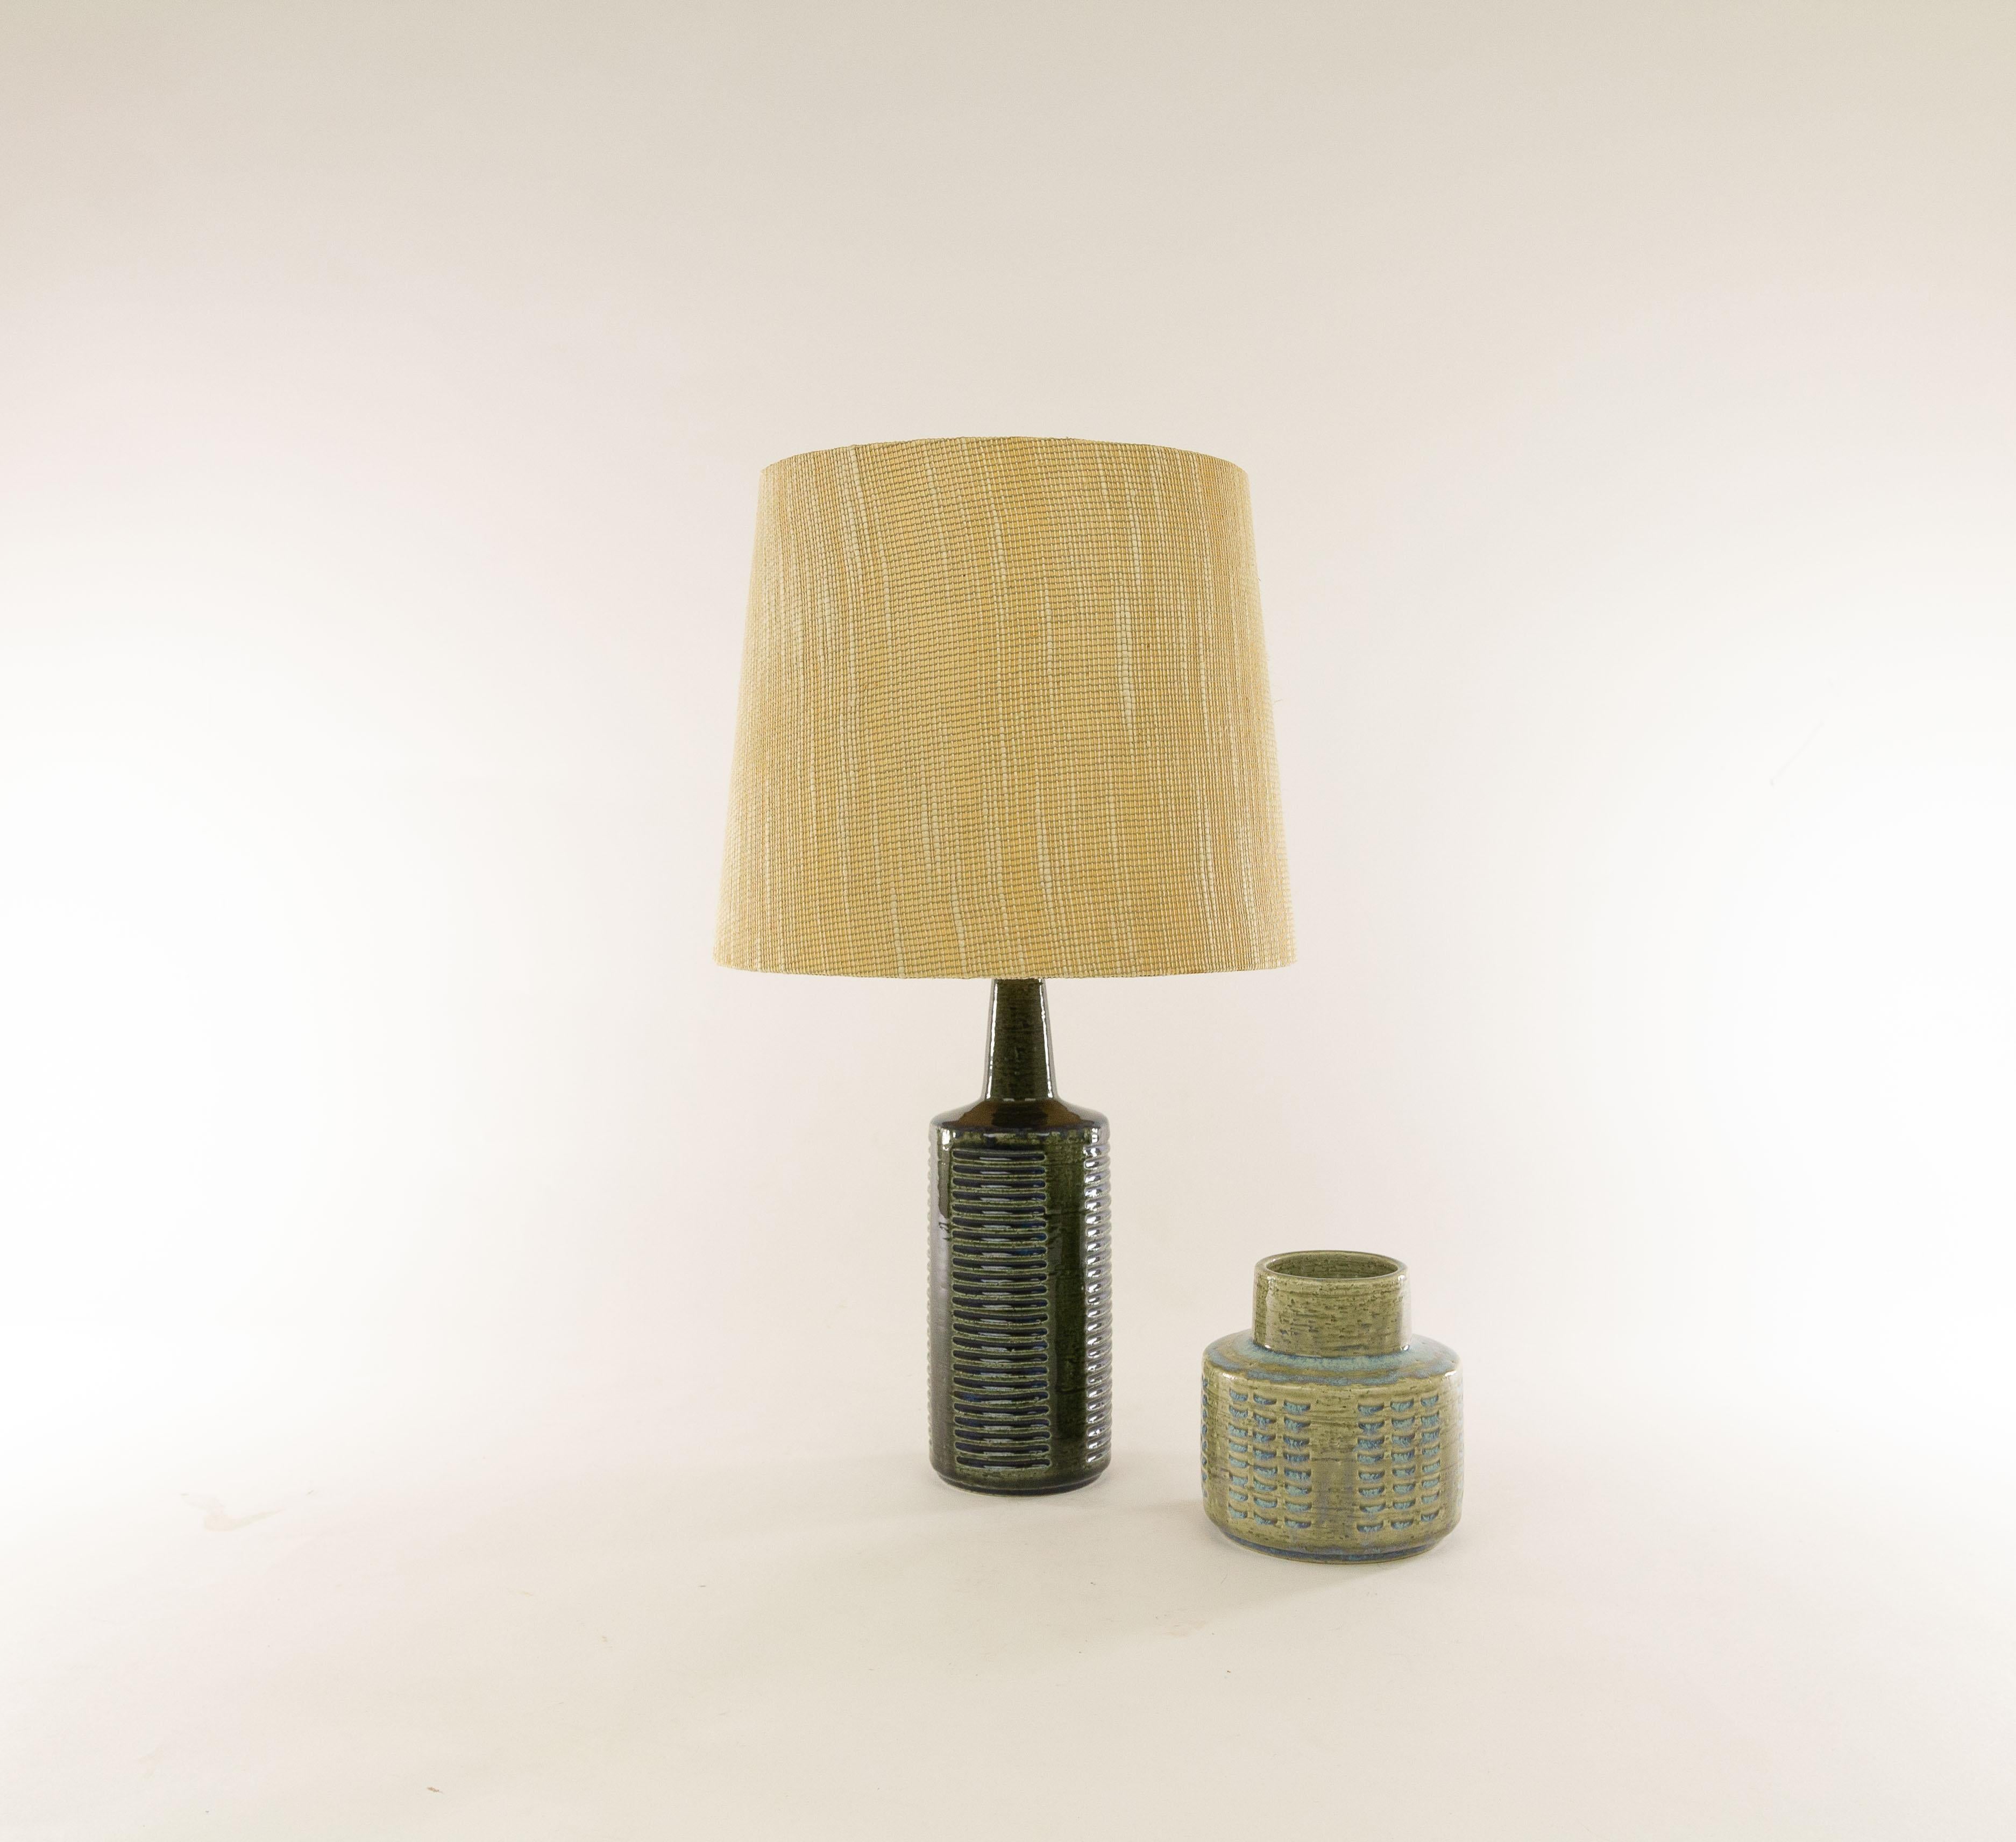 A pair of DL/30 table lamps made by Annelise and Per Linnemann-Schmidt for Palshus in the 1960s. The color of both pieces is Green and Navy Blue.

The lamps come with their original lampshade holders. The lampshades shown are for display purposes